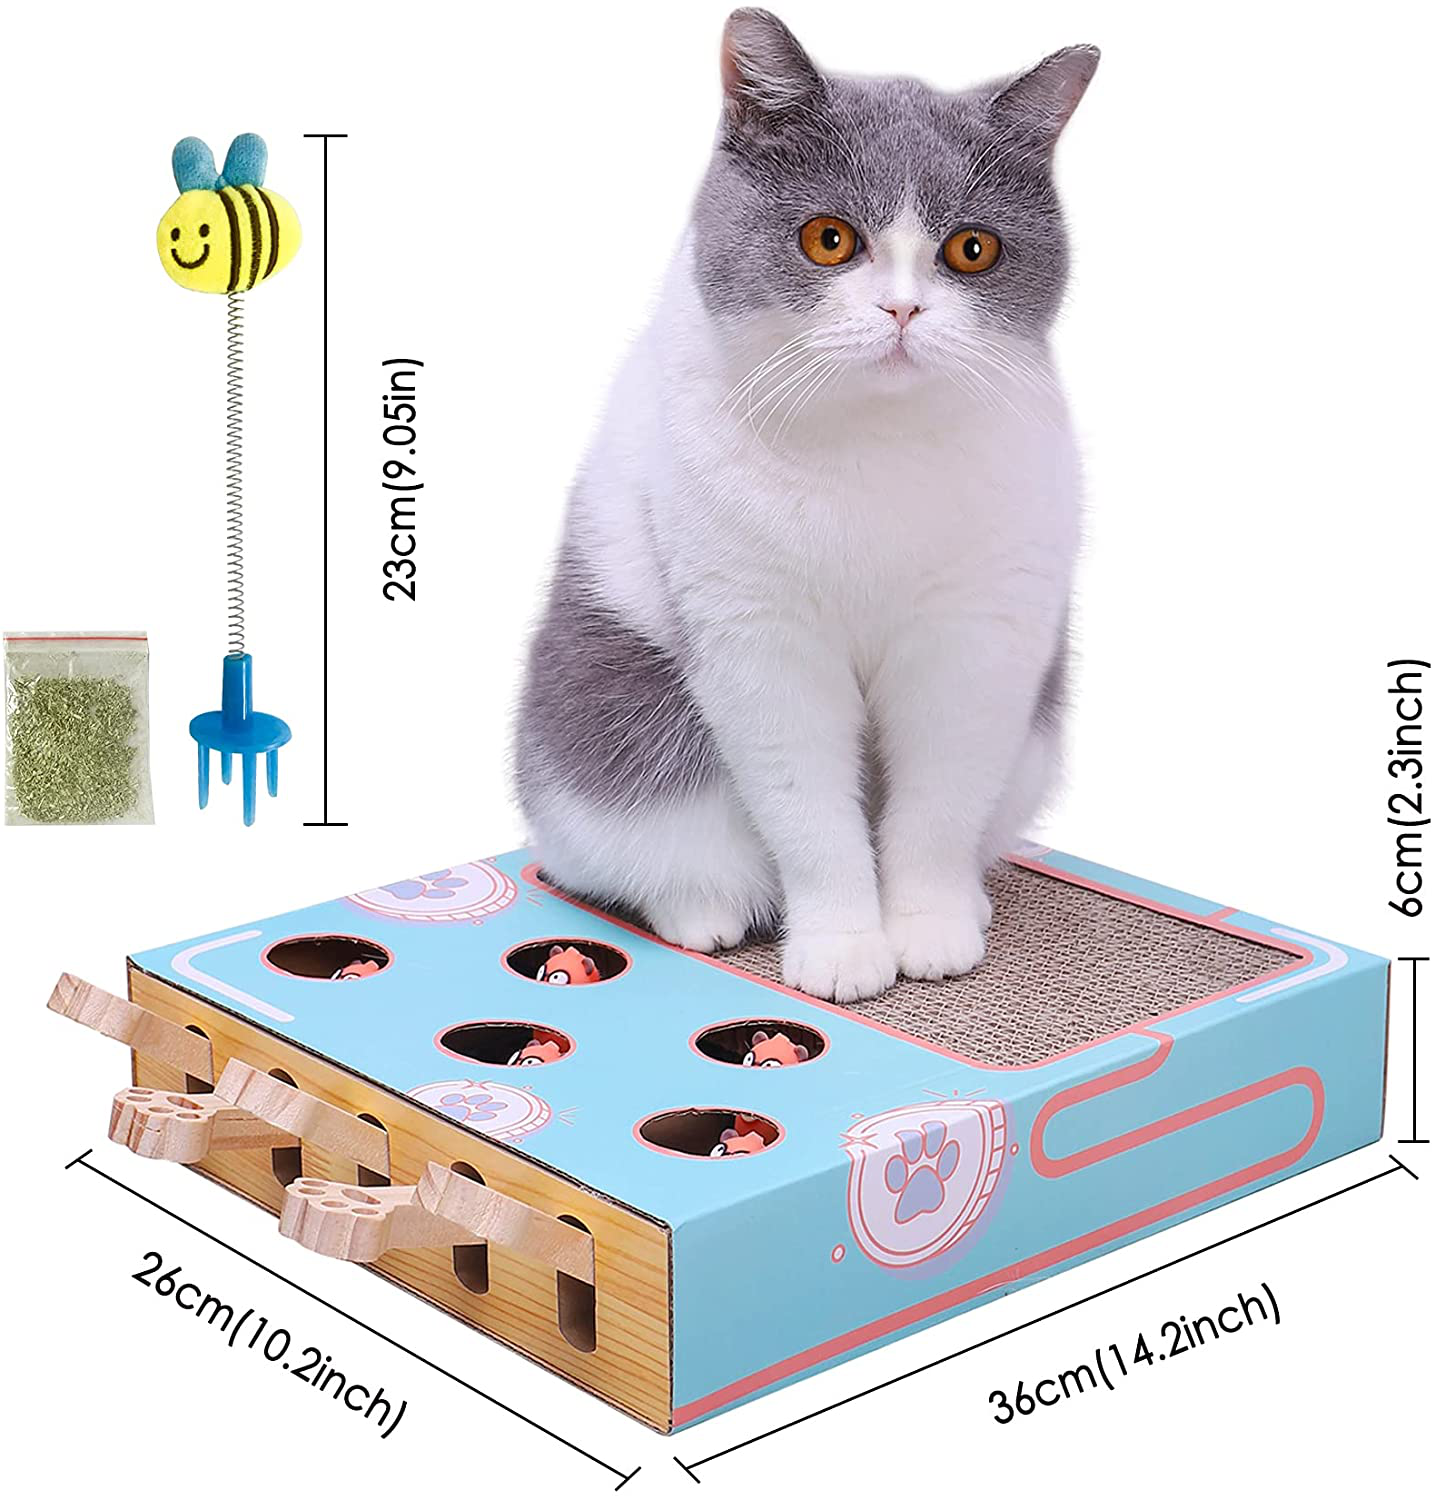 Corrugated Cat Scratcher, Cat Scratch Pad with Whack a Mole Game and Funny Cat Stick, Multi-Purpose Scratching Pad, Thickened Durable Cardboard Cat Scratcher for Furniture Protector